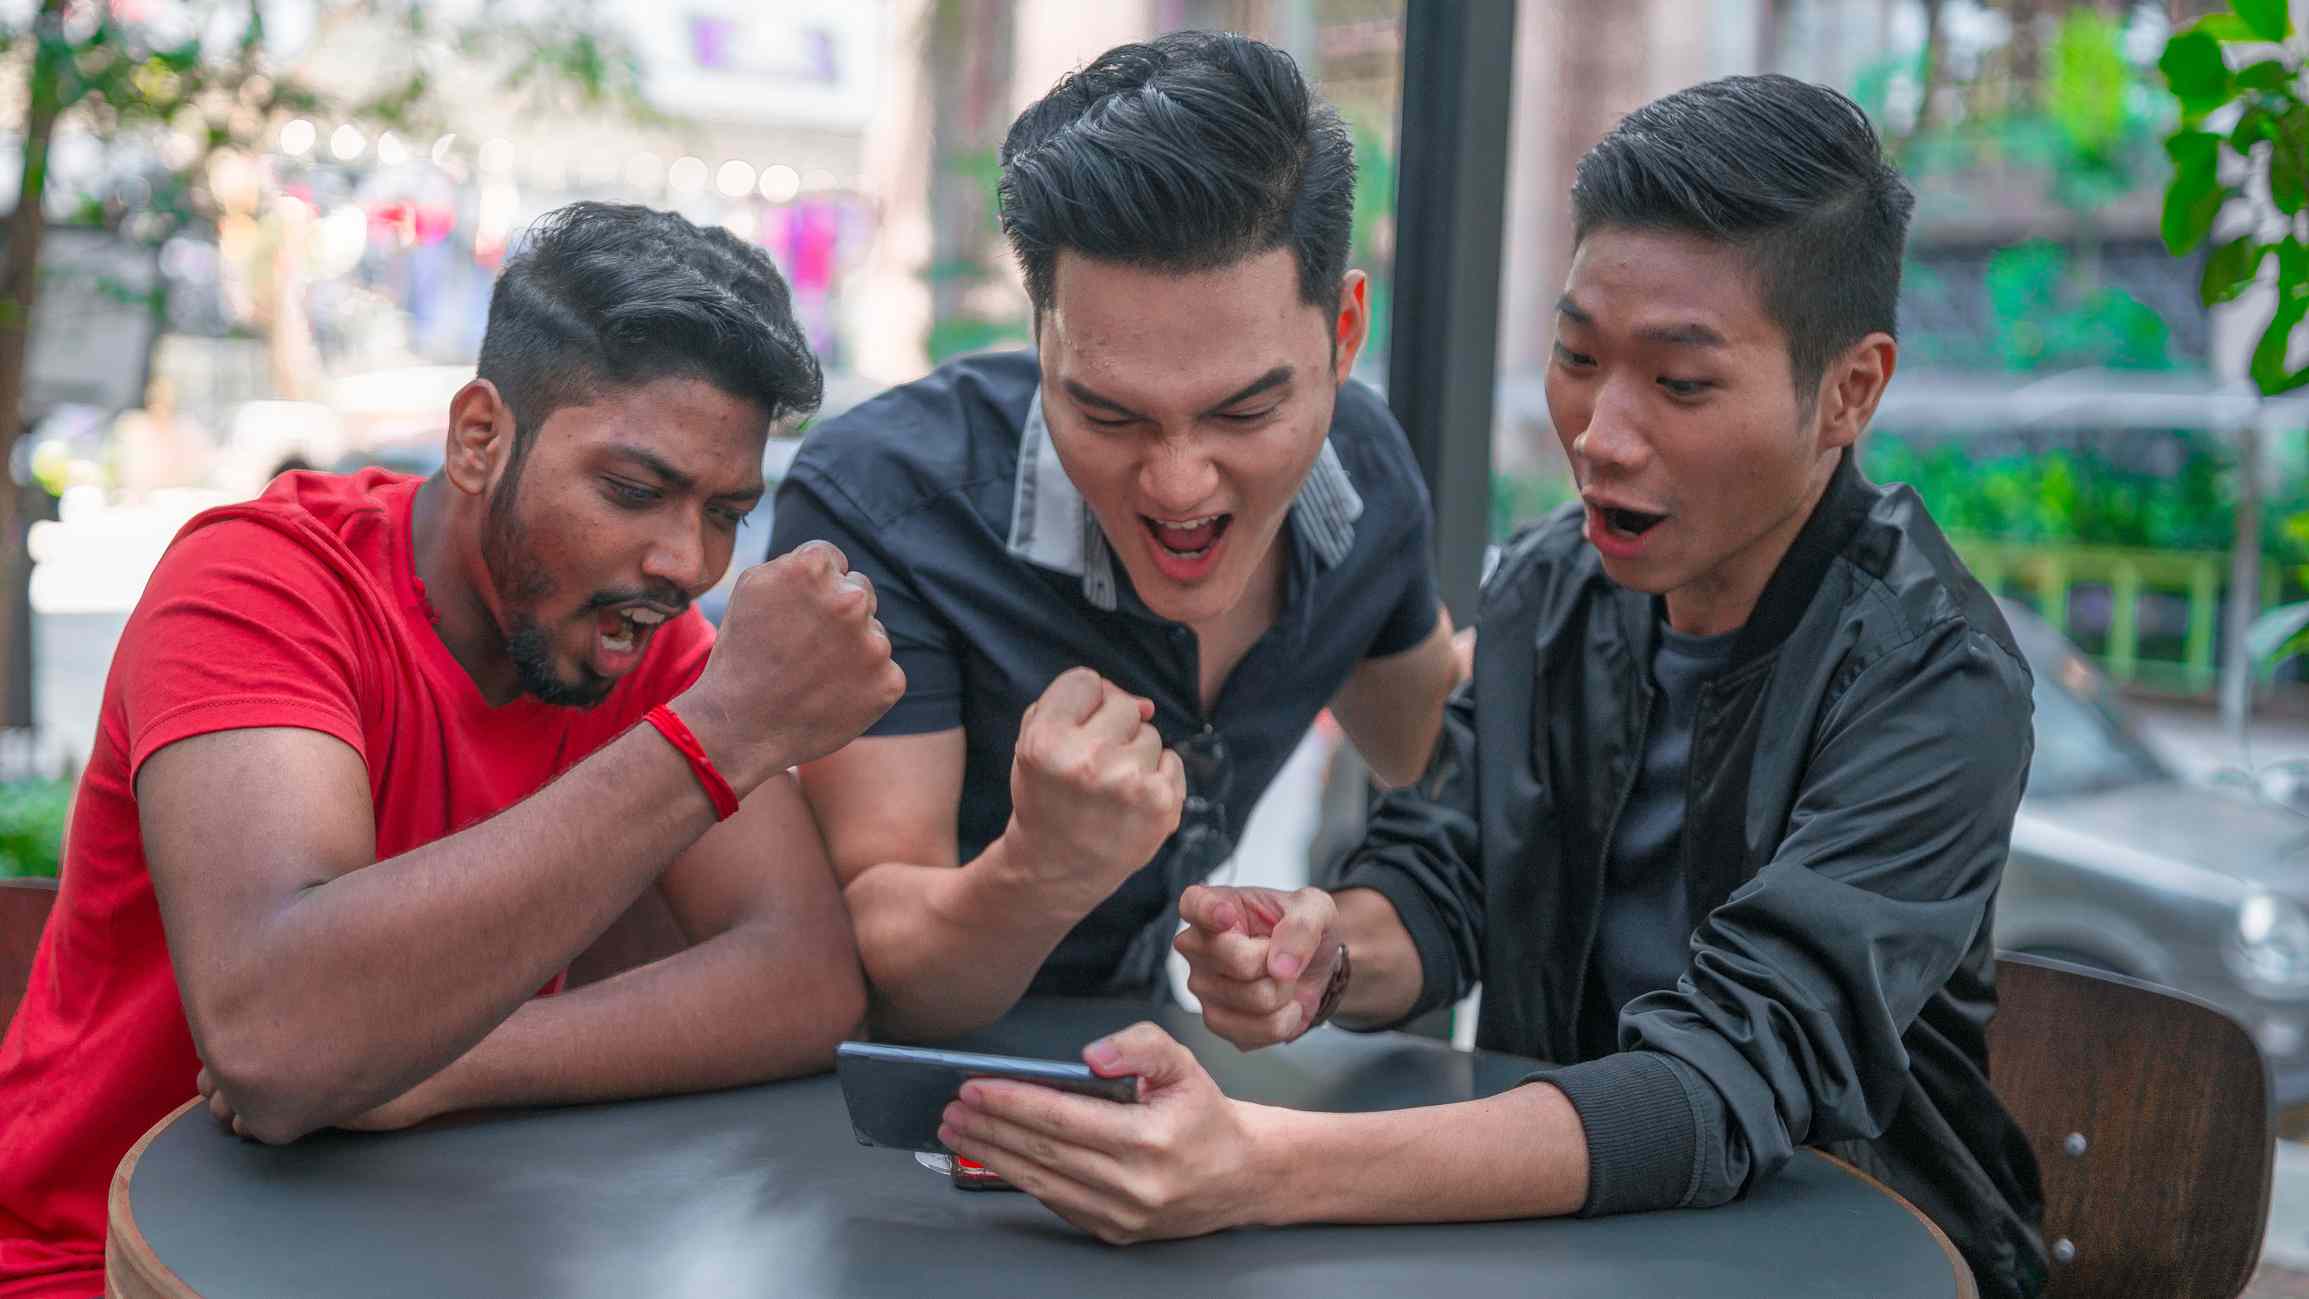 Group of friends playing mobile games on smartphone